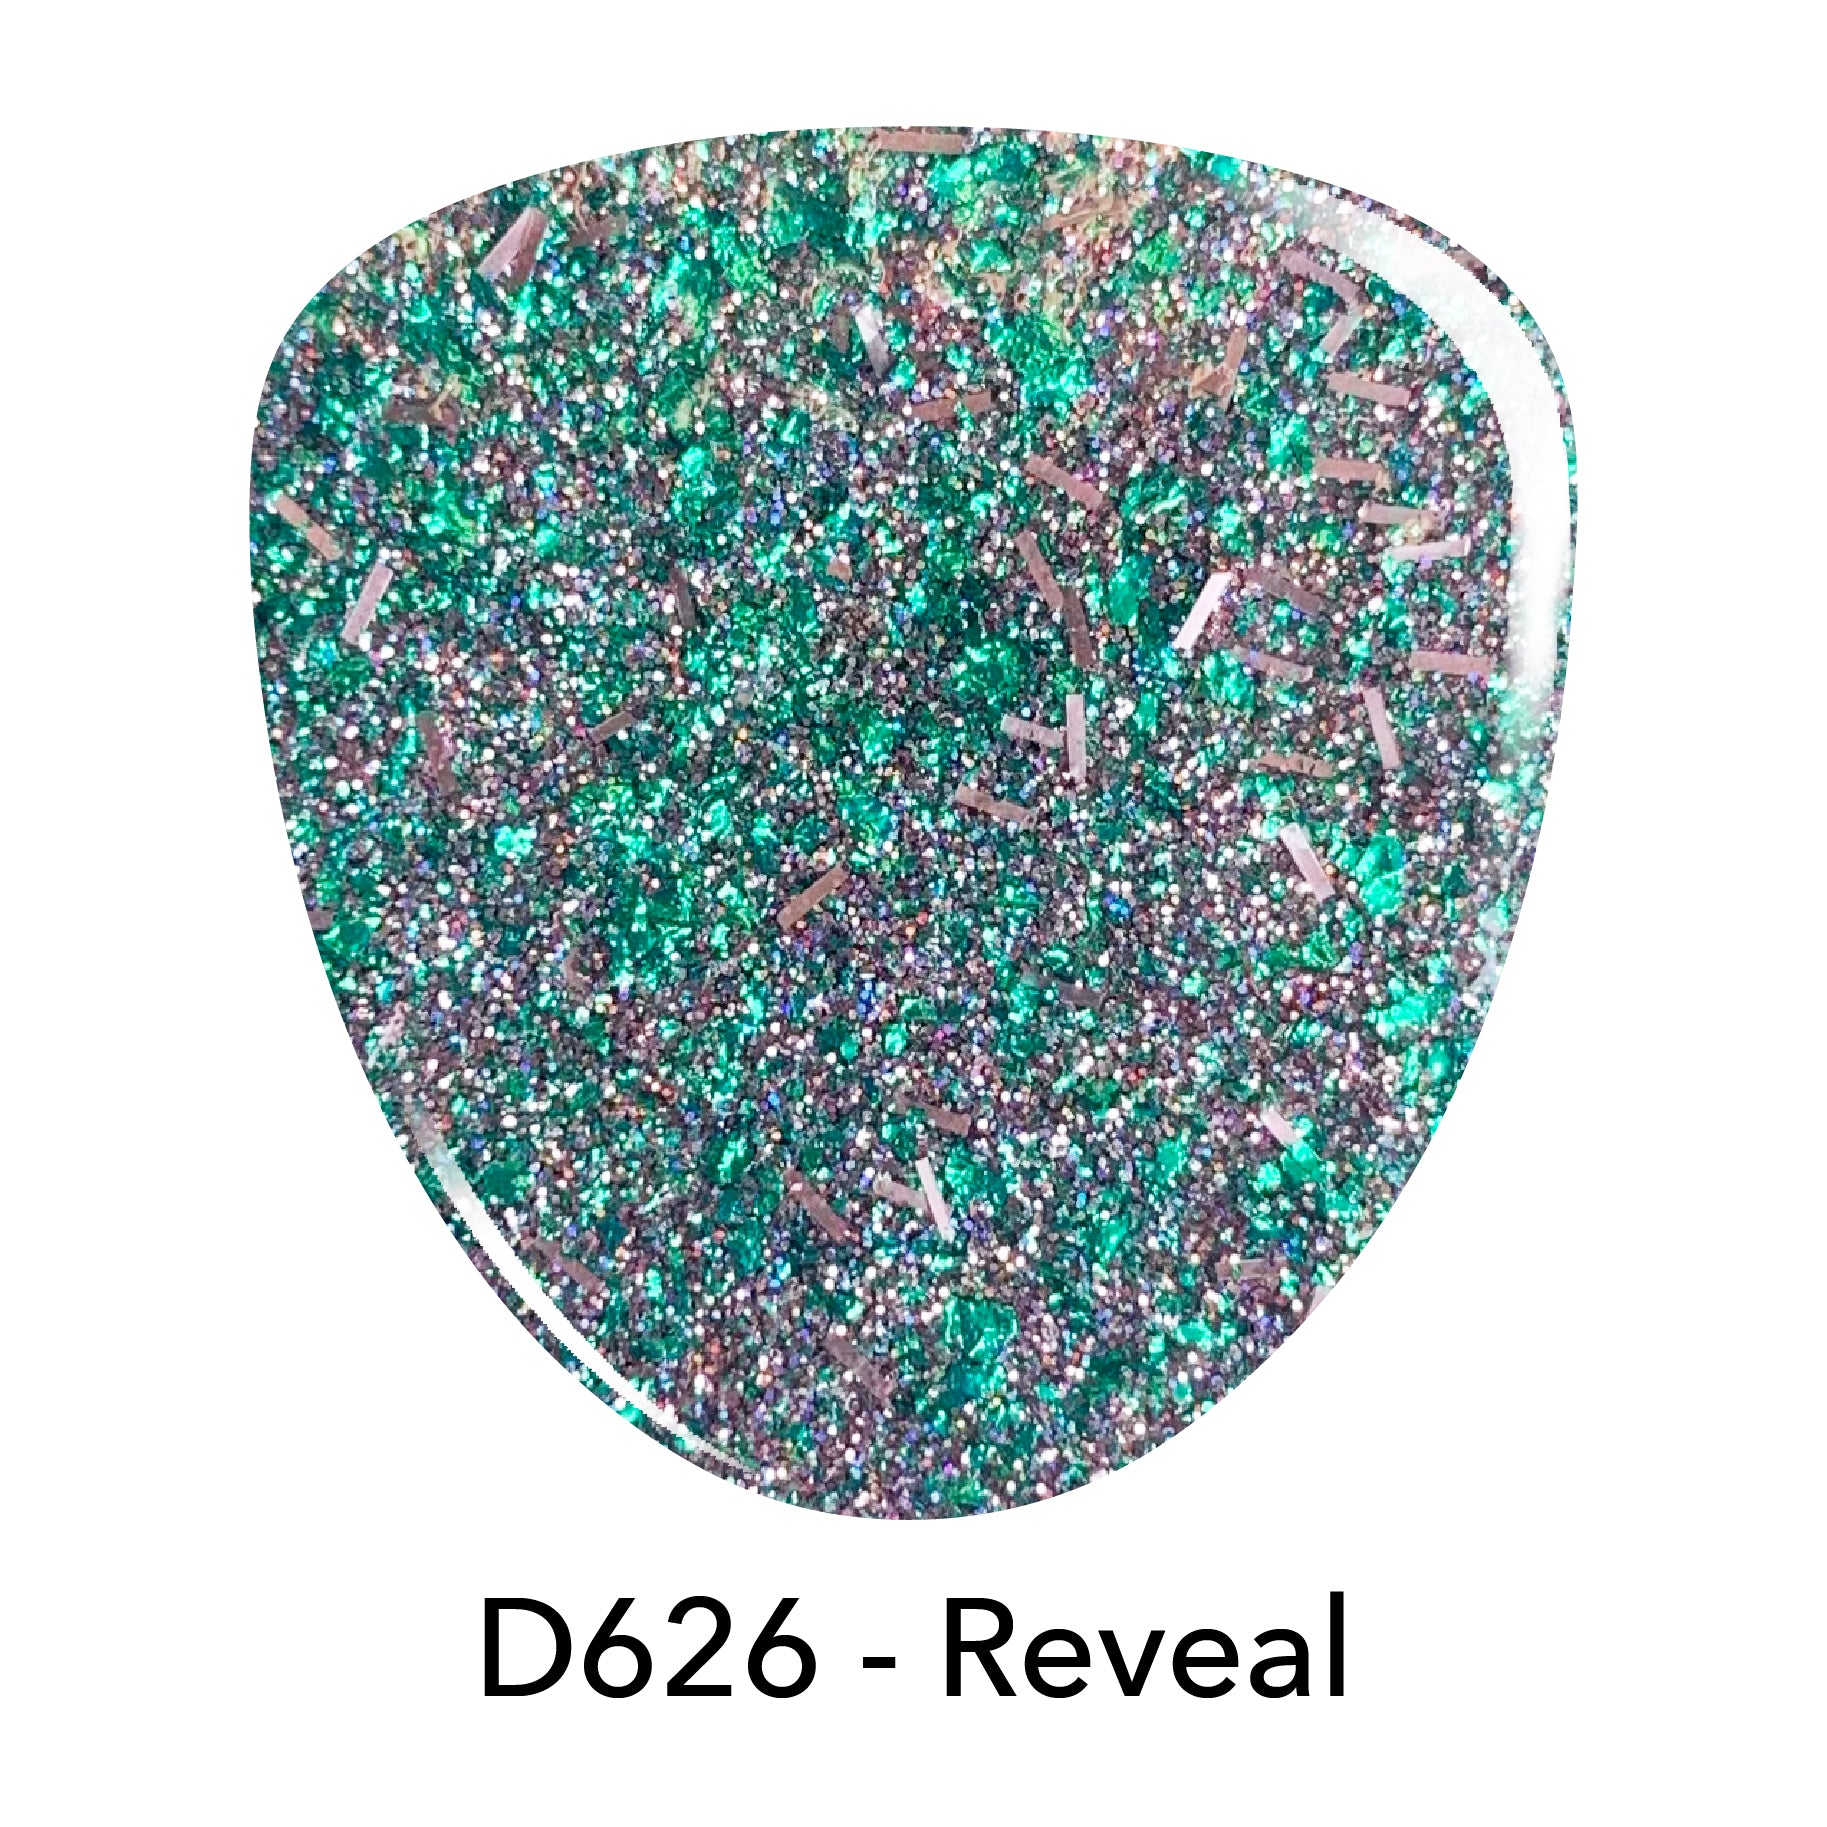 Revel Nail - 24 New Mood Changing Dip Powders!! Check them out at  RevelNail.com and use the promo code CHANGE10 for 10% off your color  changing dip powder purchase!